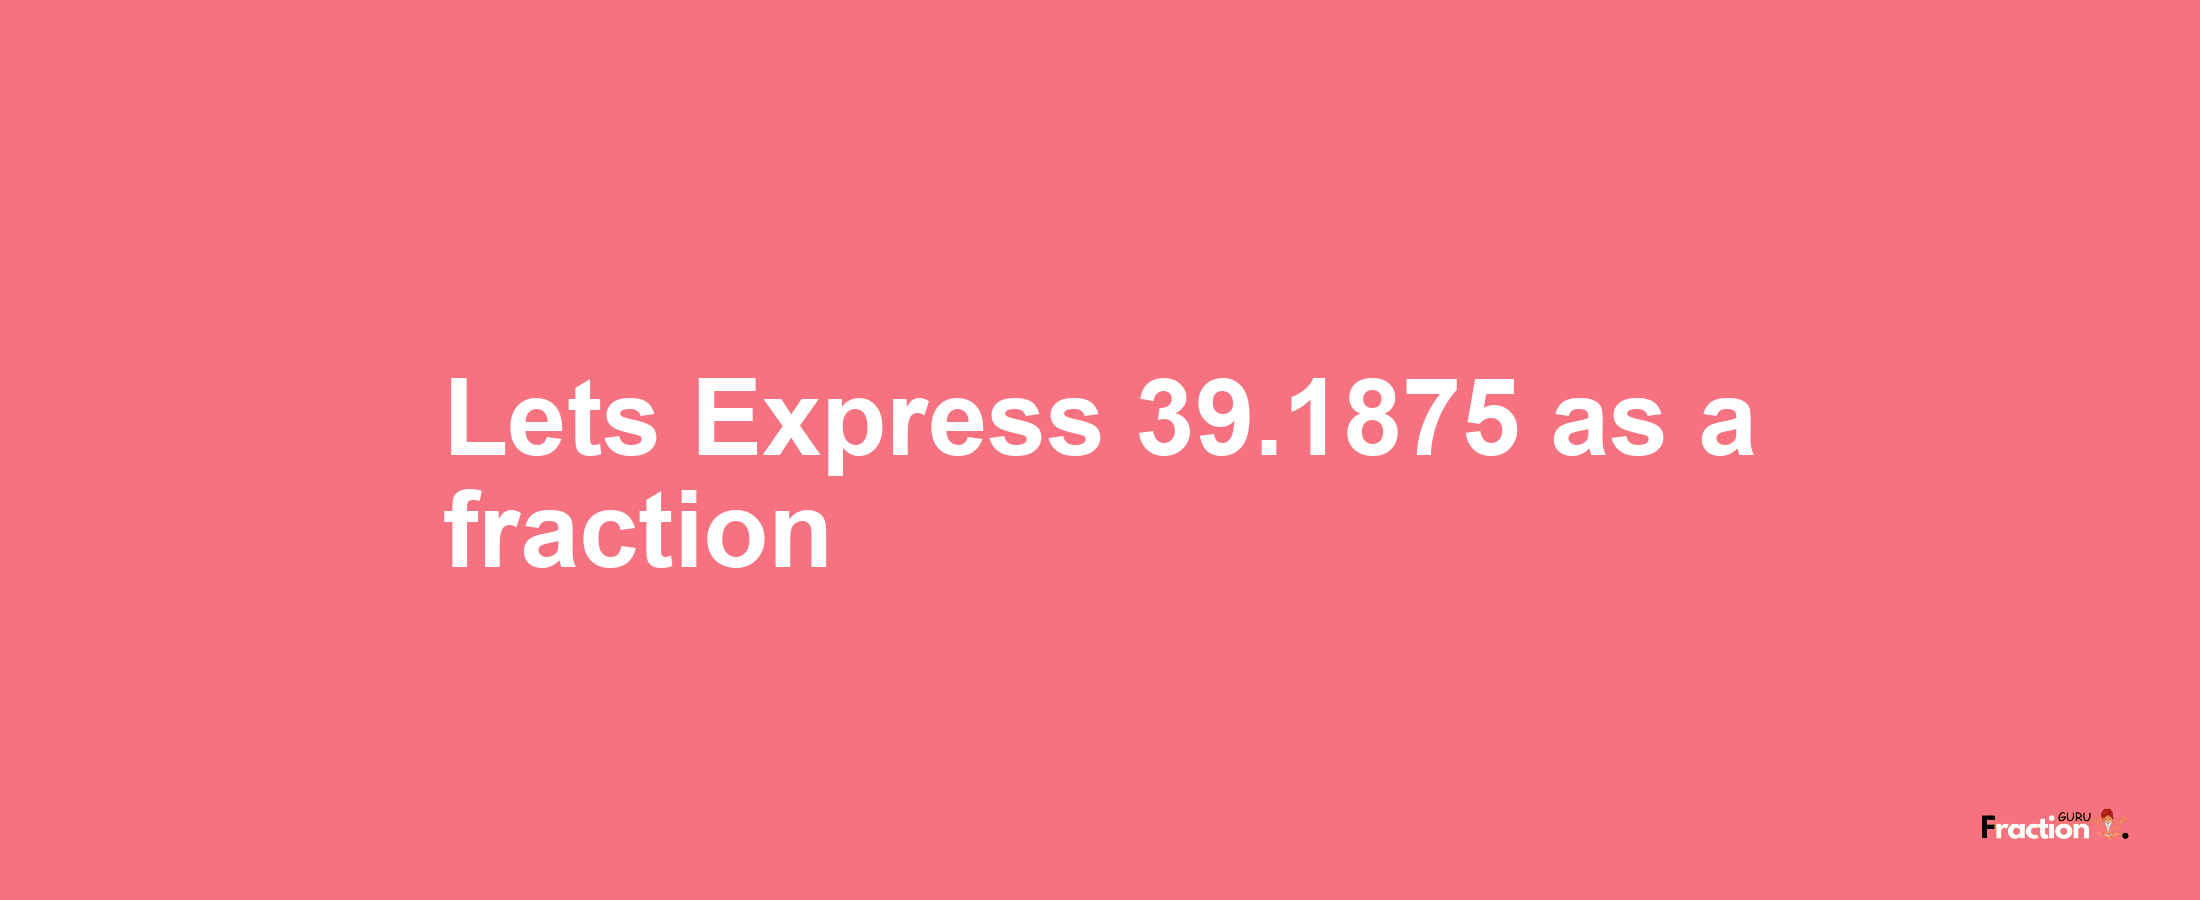 Lets Express 39.1875 as afraction